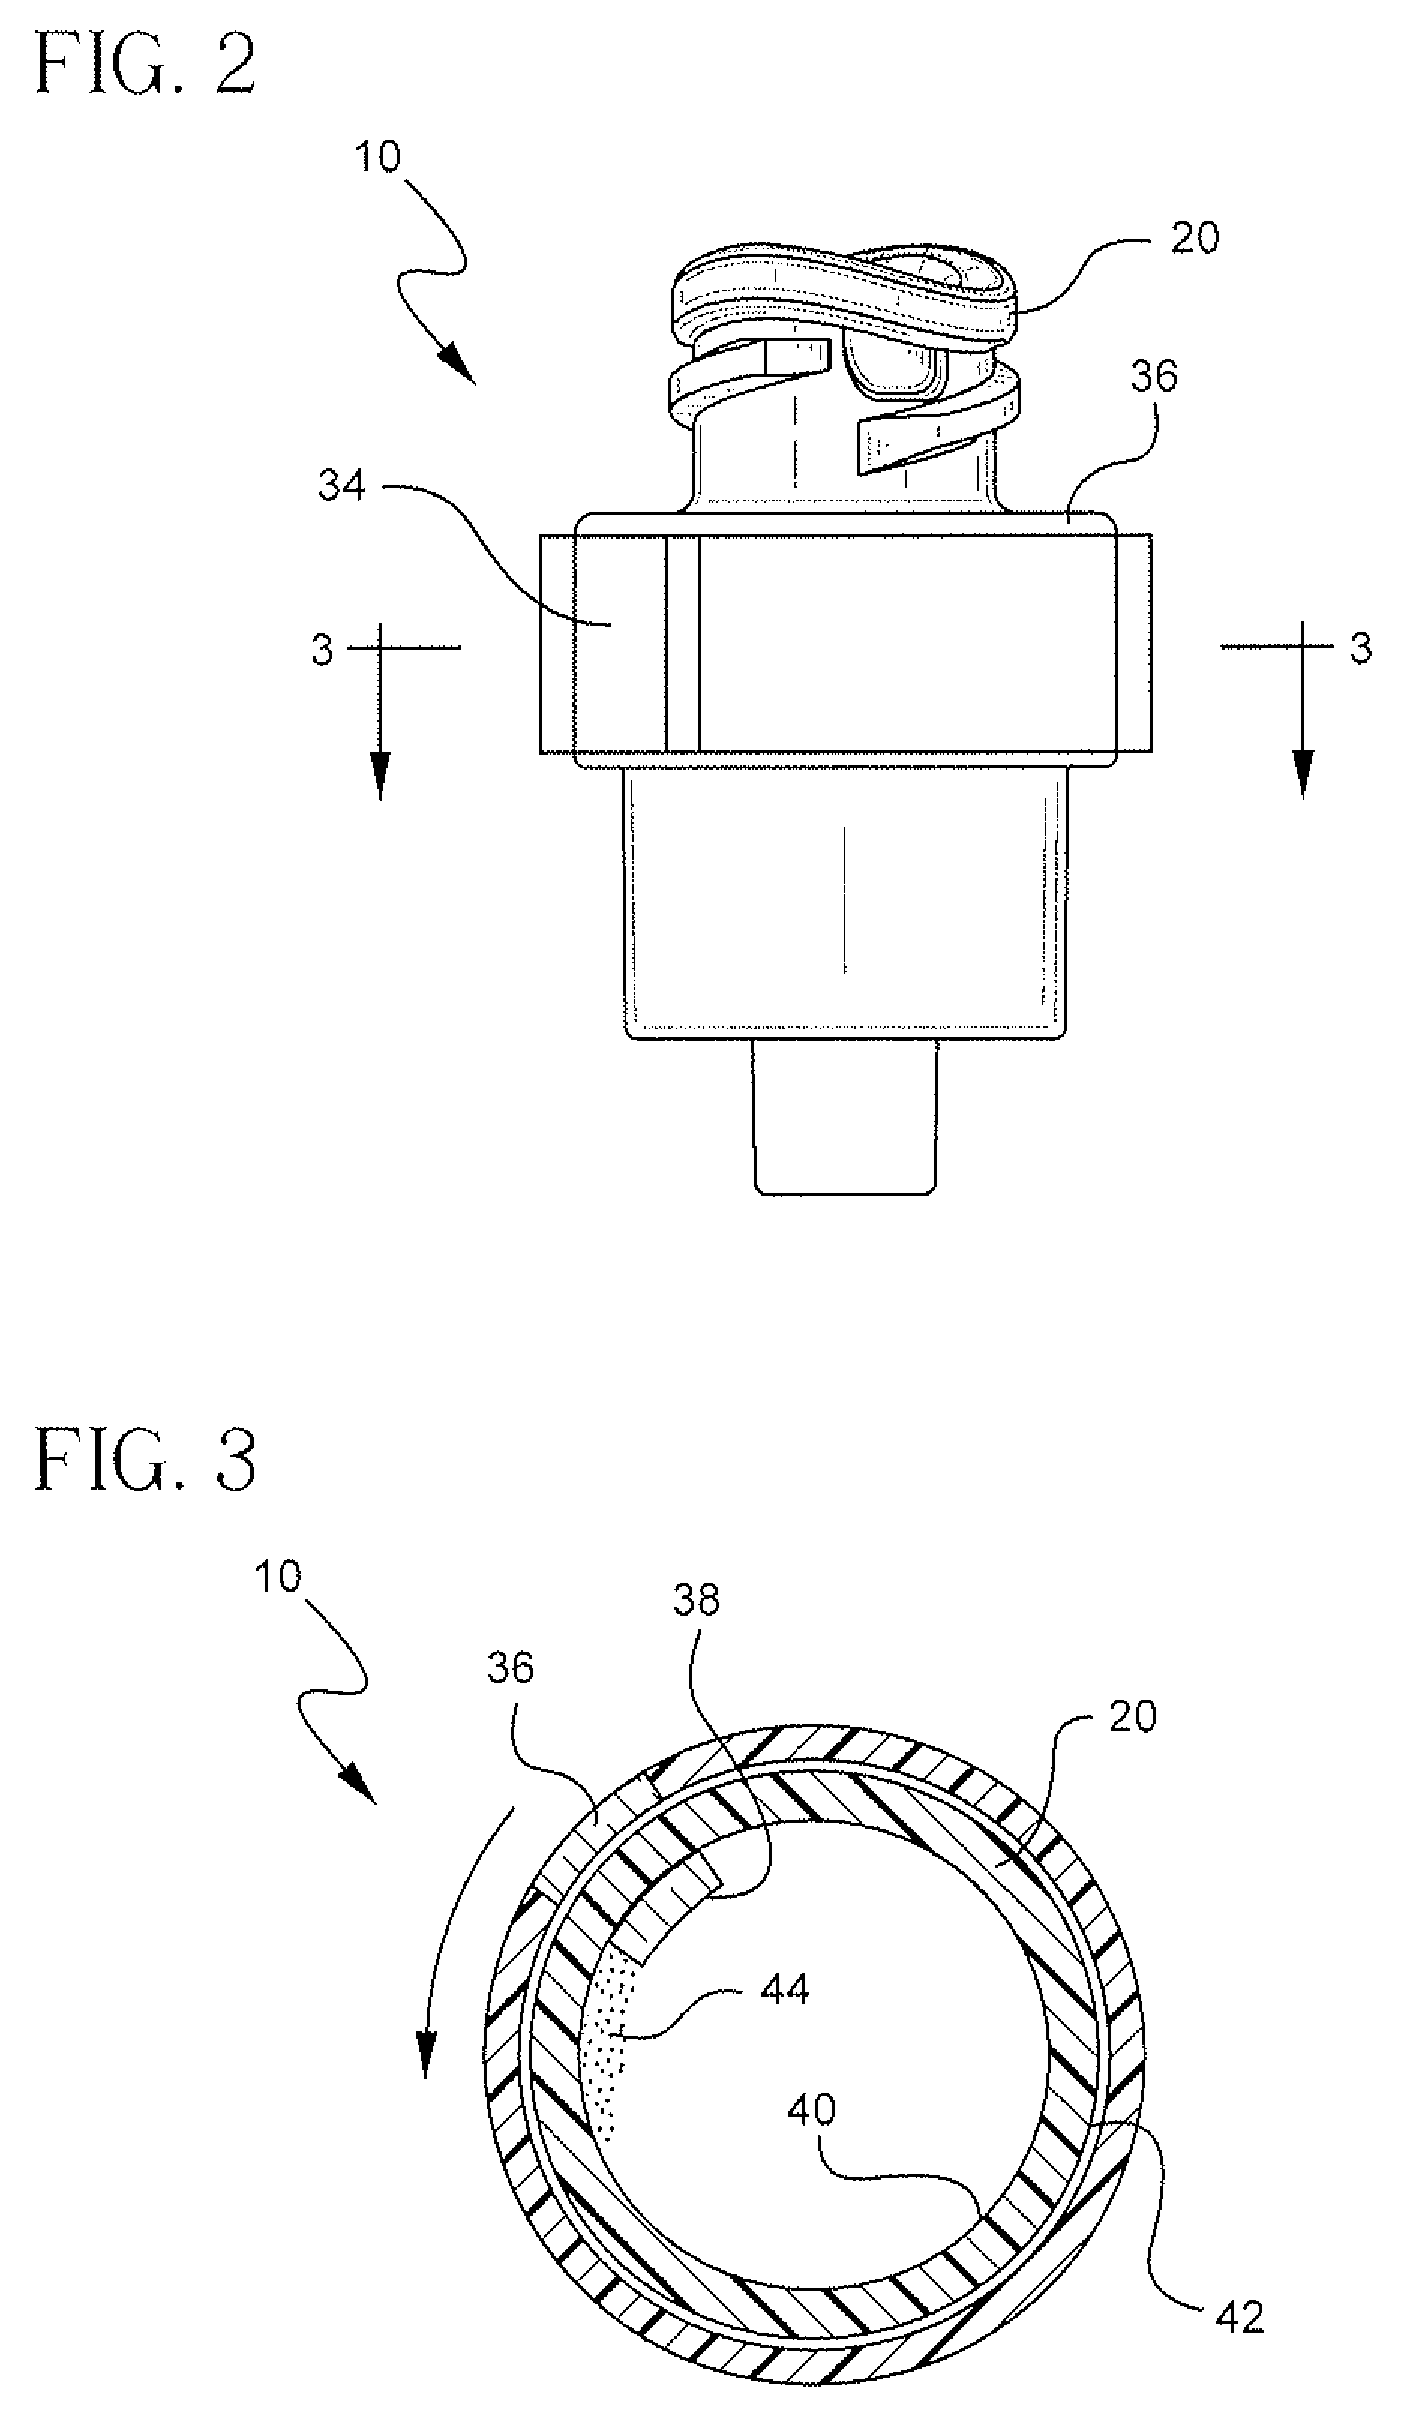 Antimicrobial vascular access device